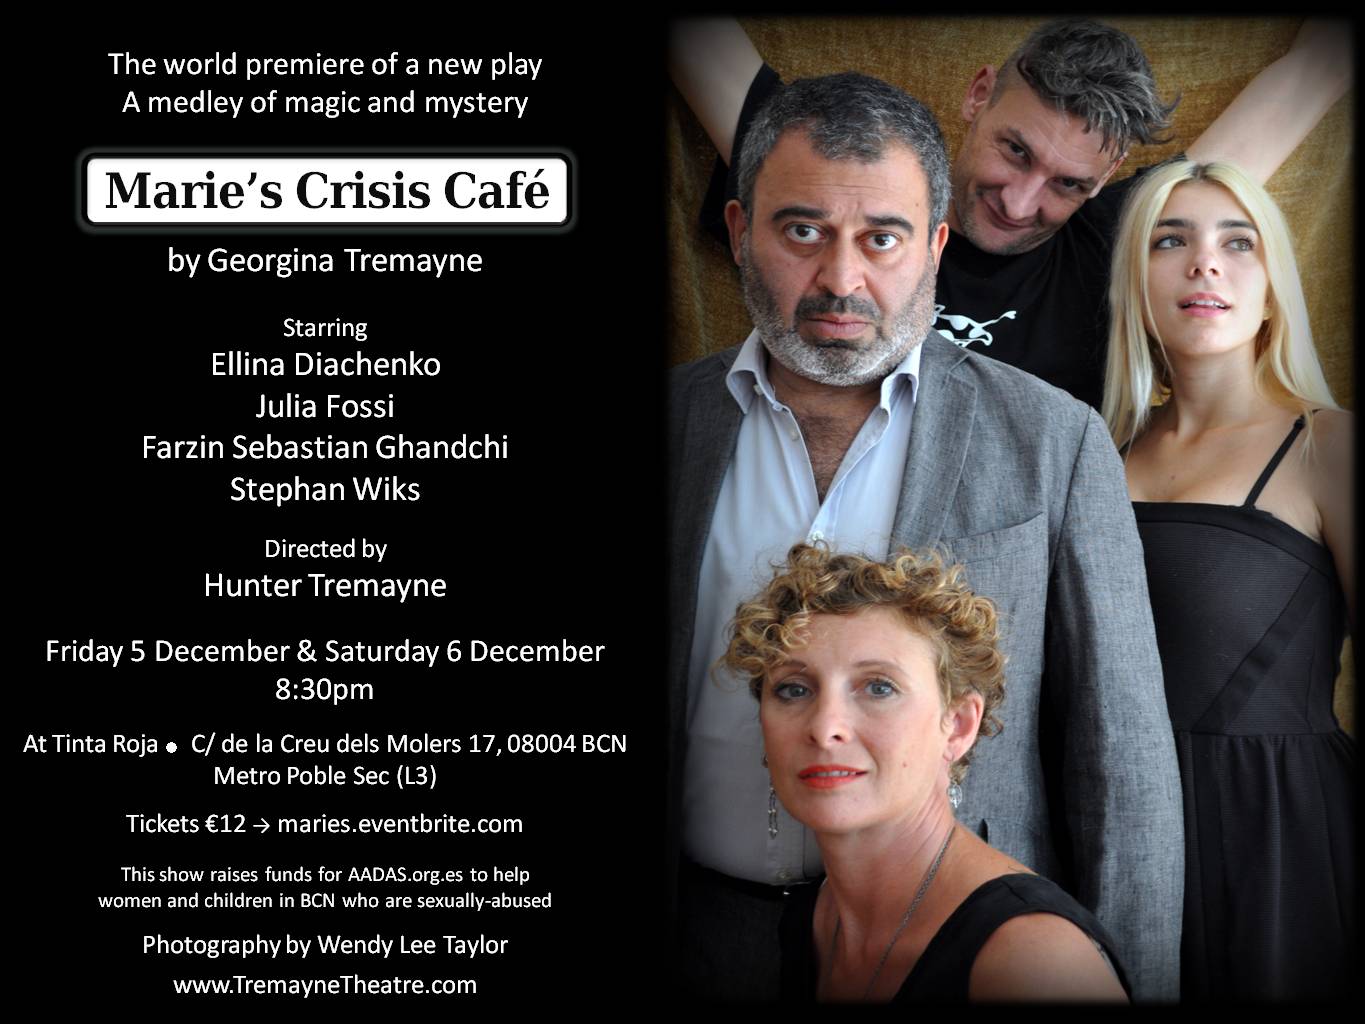 Marie's Crisis Cafe